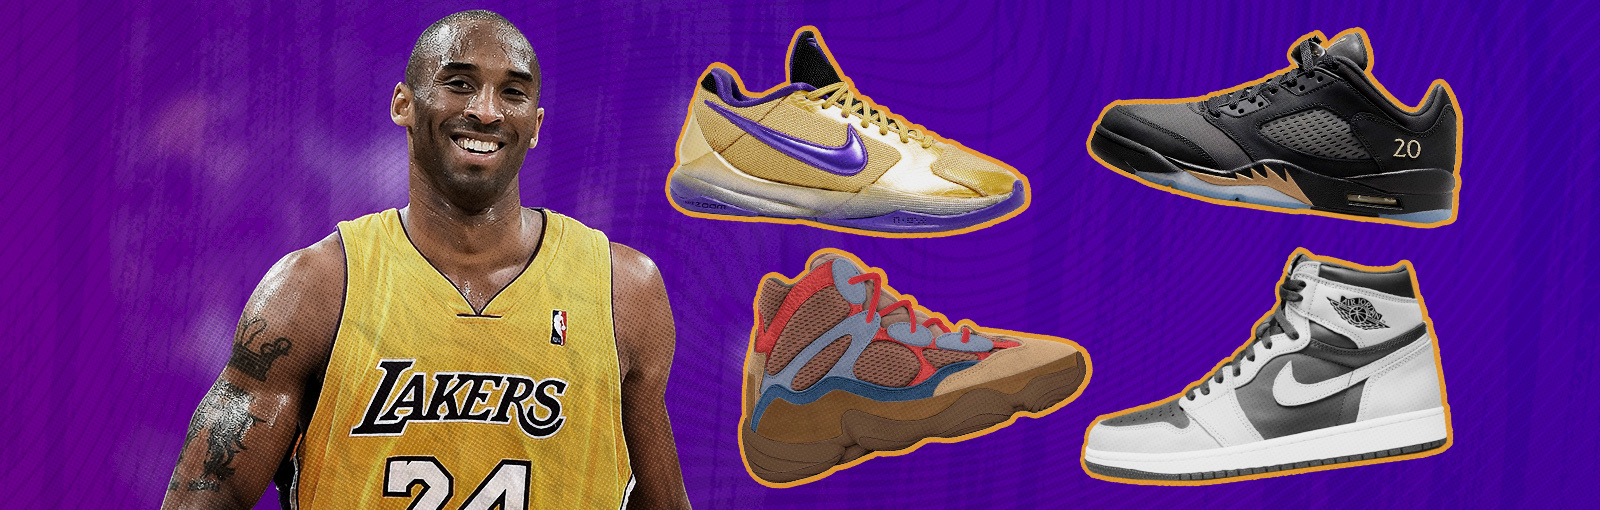 Championship gold Kobe 5s for Anthony - Complex Sneakers